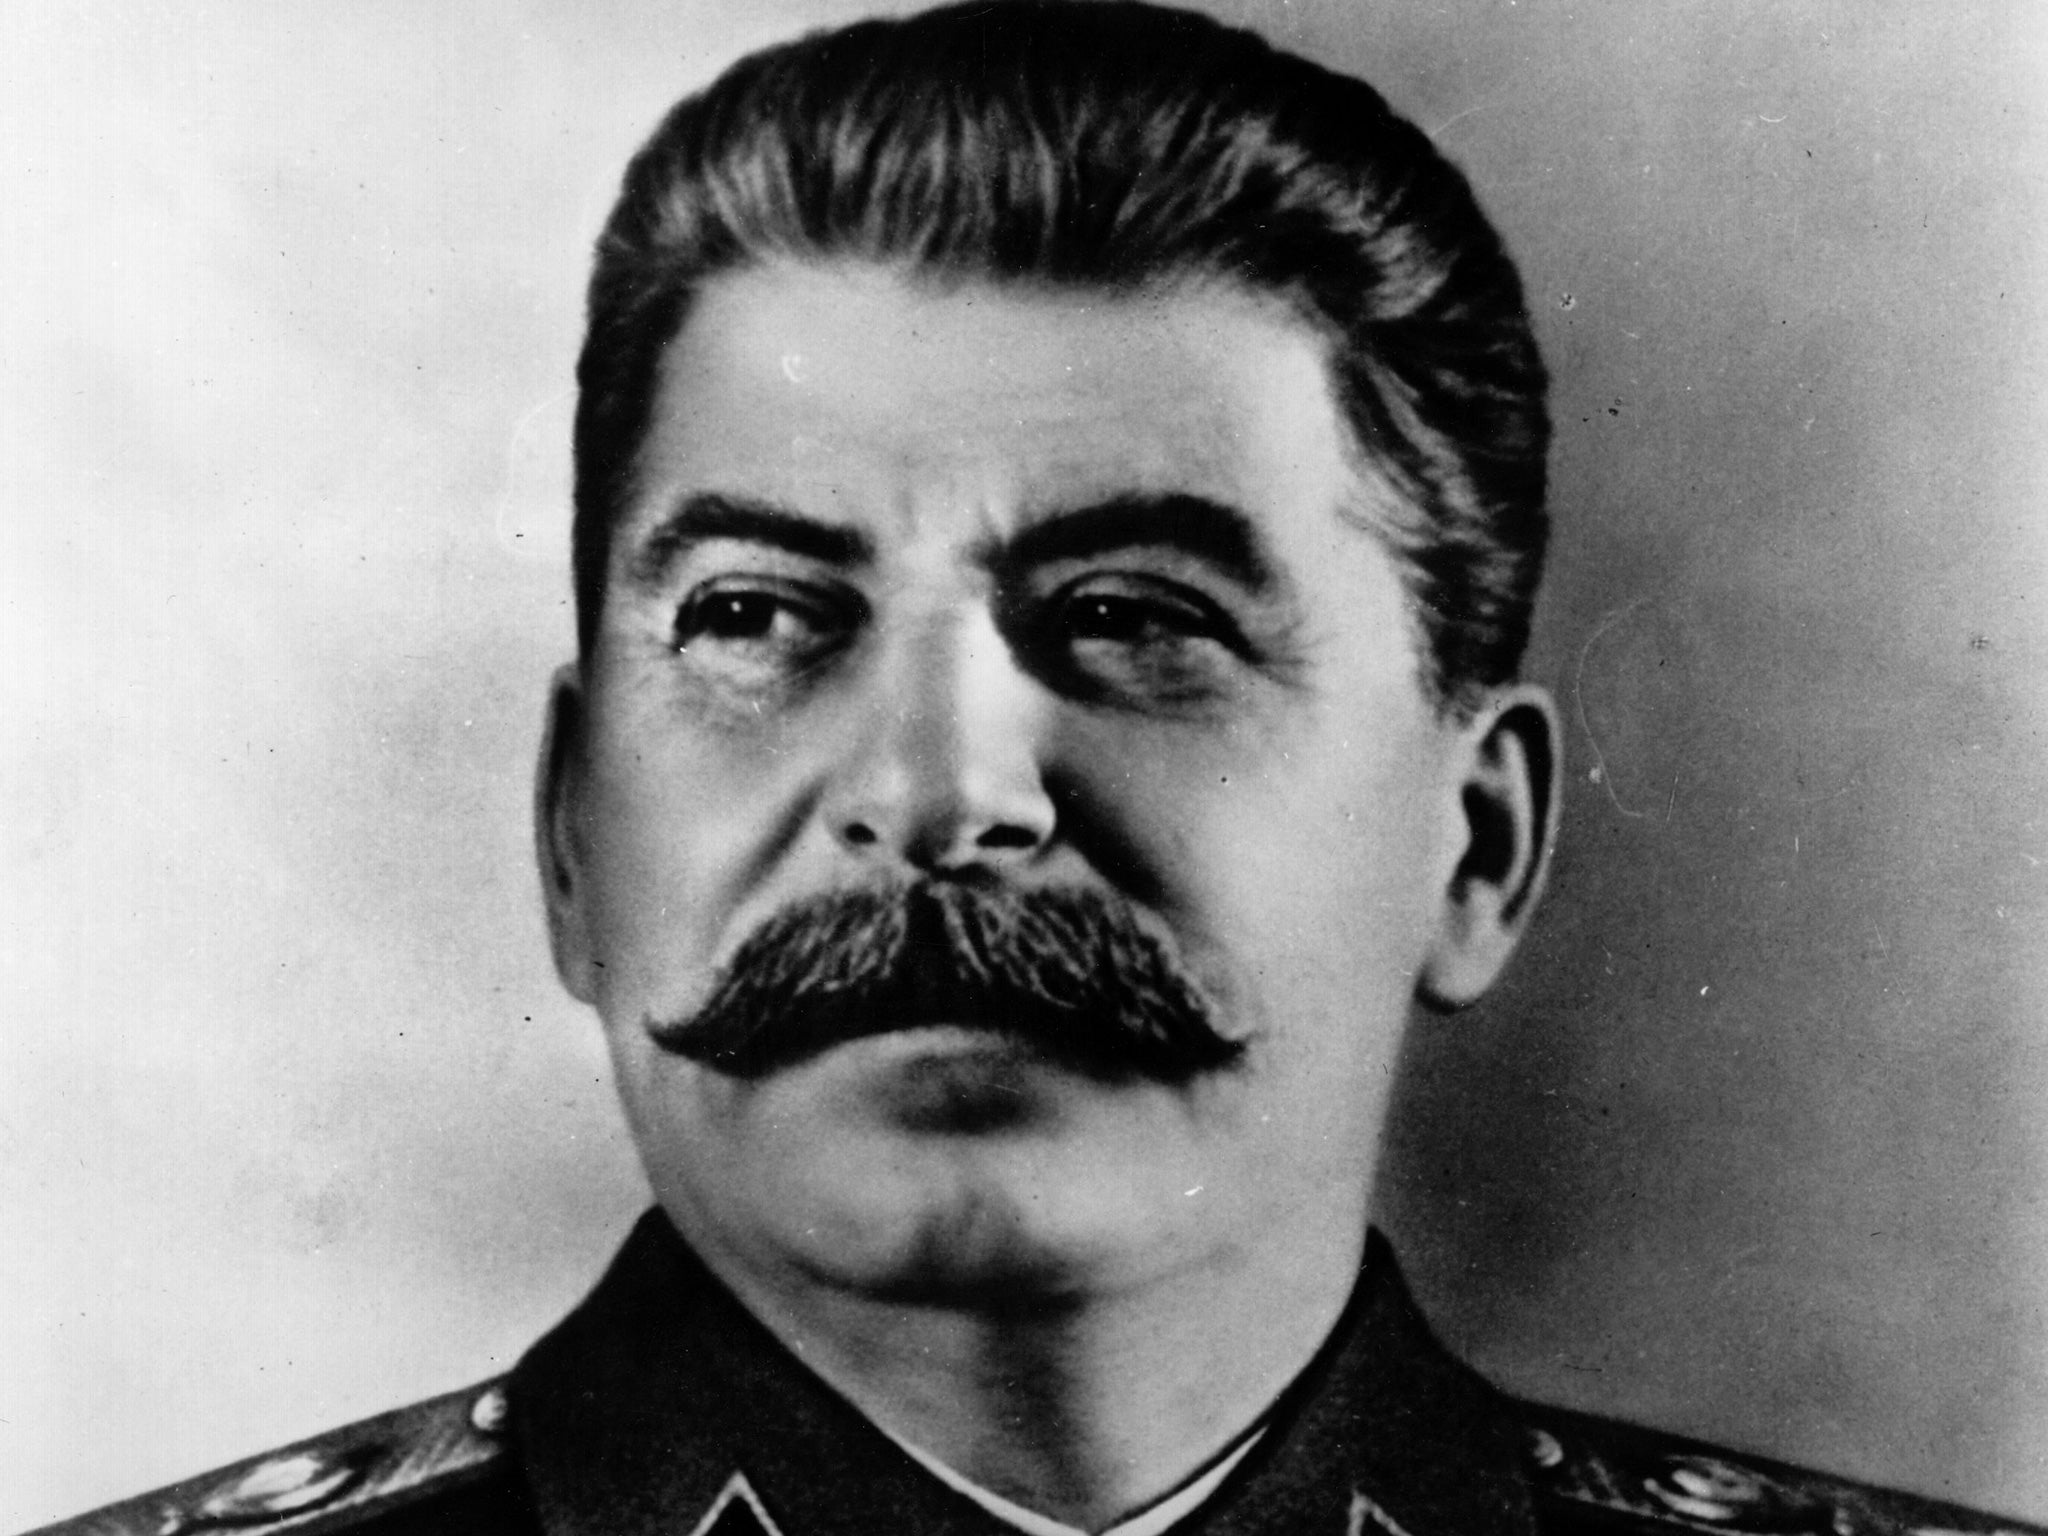 Joseph Stalin’s attempts to spread disinformation about the discovery of Hitler’s remains may have helped fuel conspiracy theories that the Führer escaped from his bunker